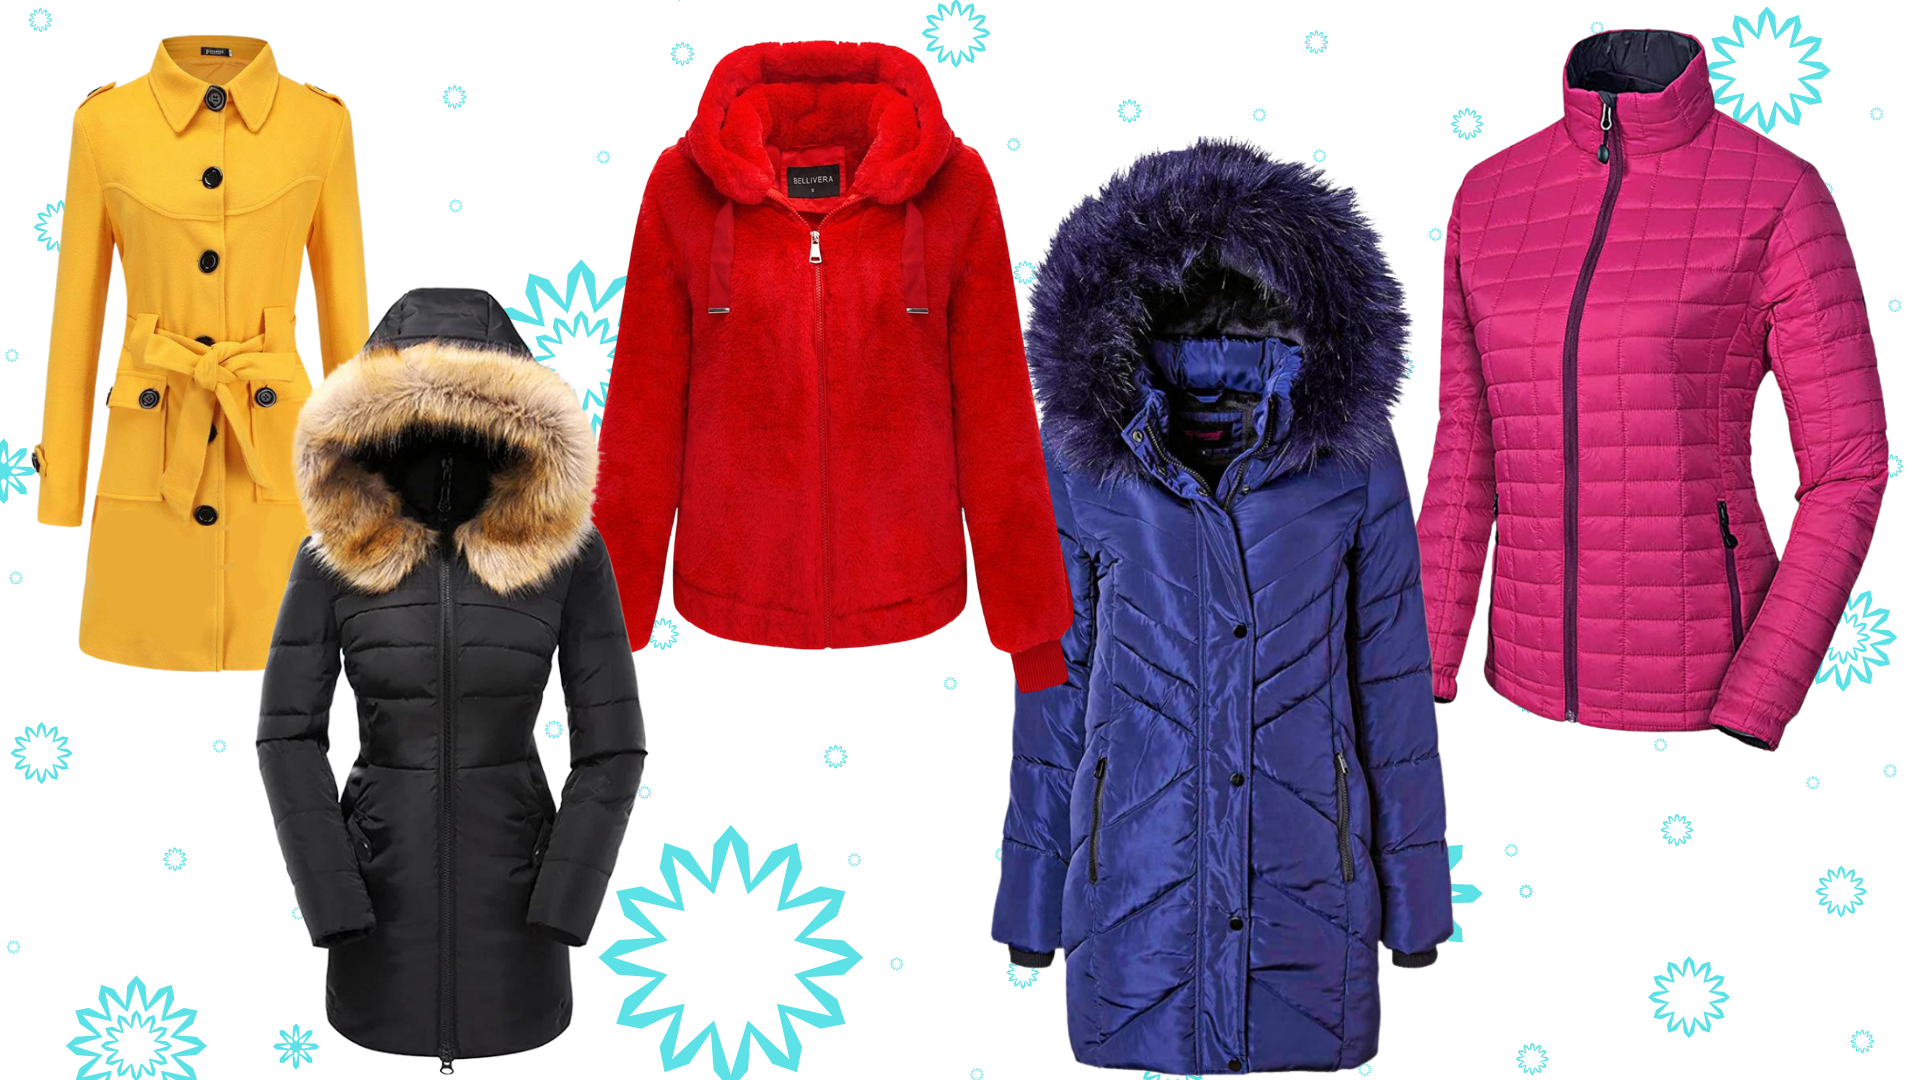 5 Best Women's Winter Coats for Extreme Cold! (2021)